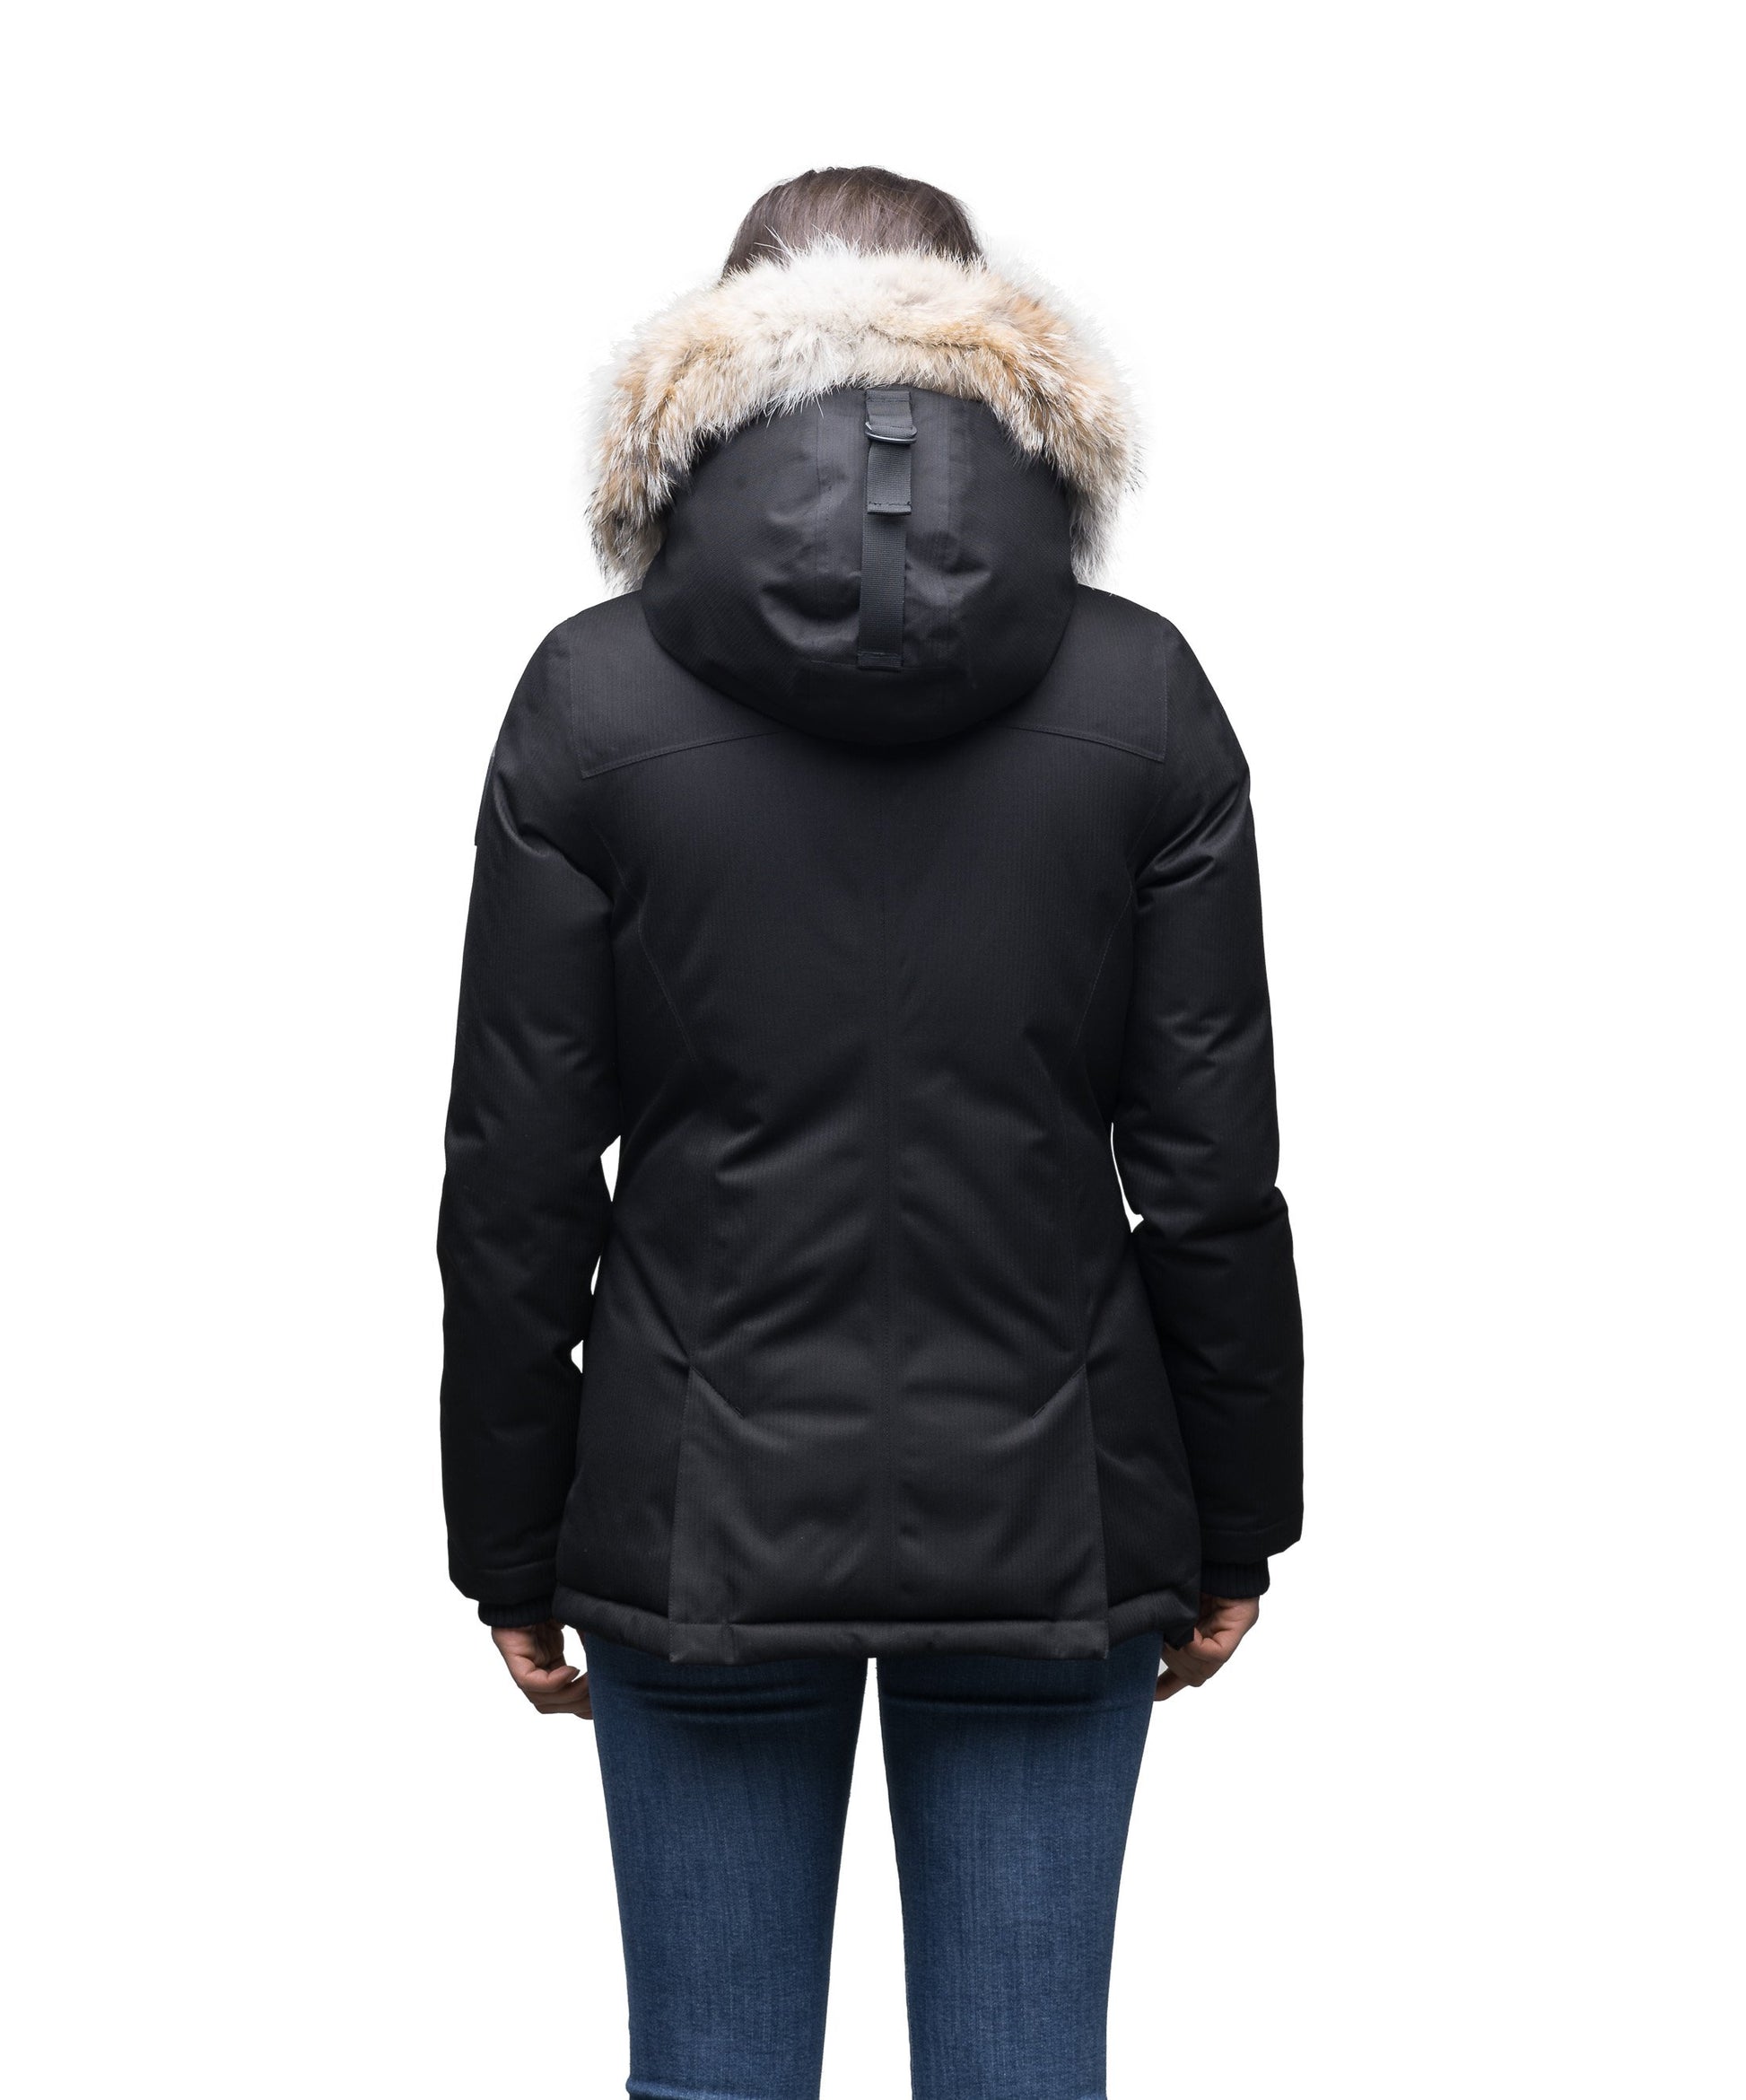 Women's hip length down filled parka in CH Black